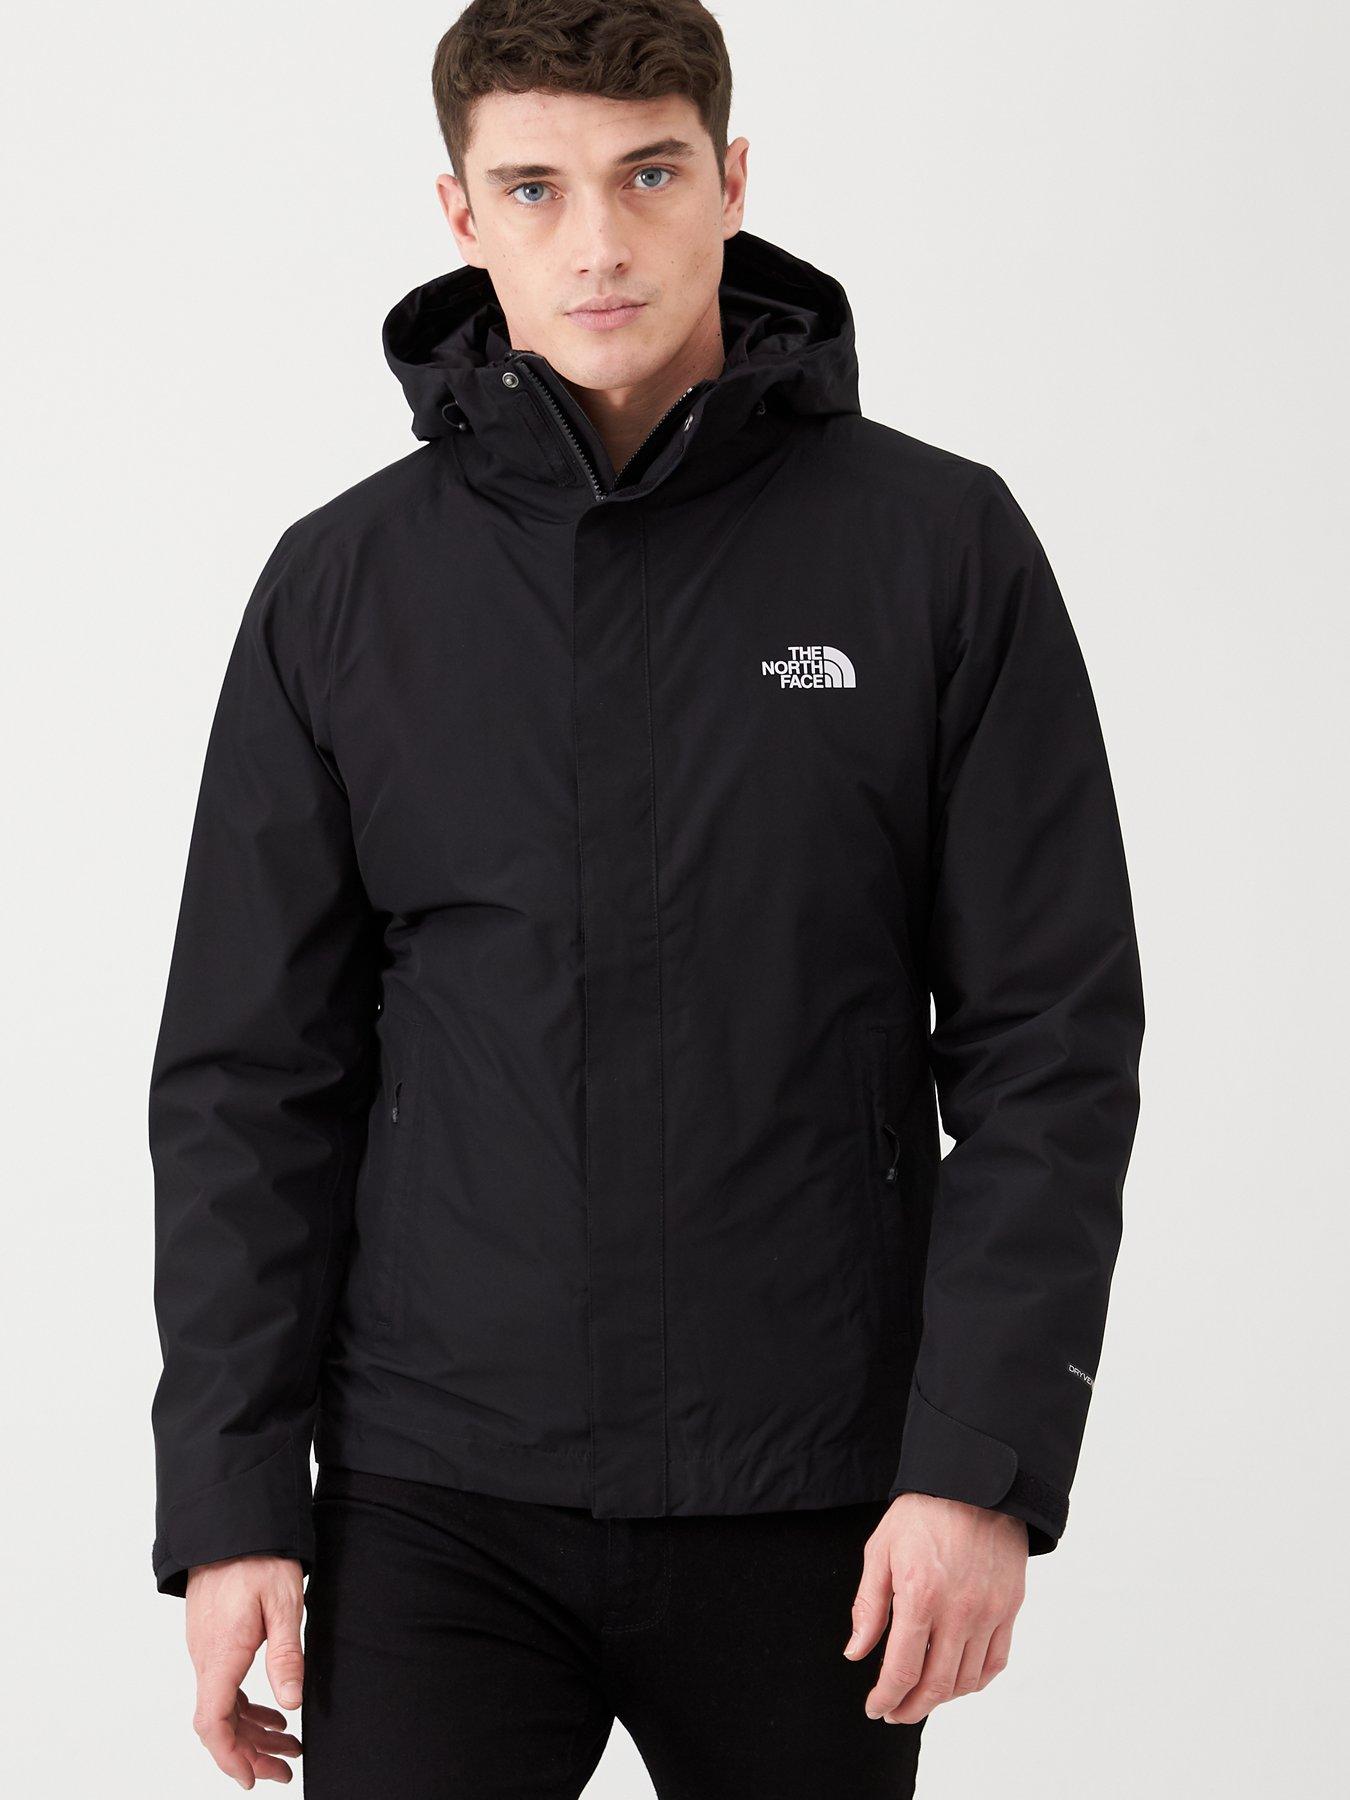 north face merak triclimate review